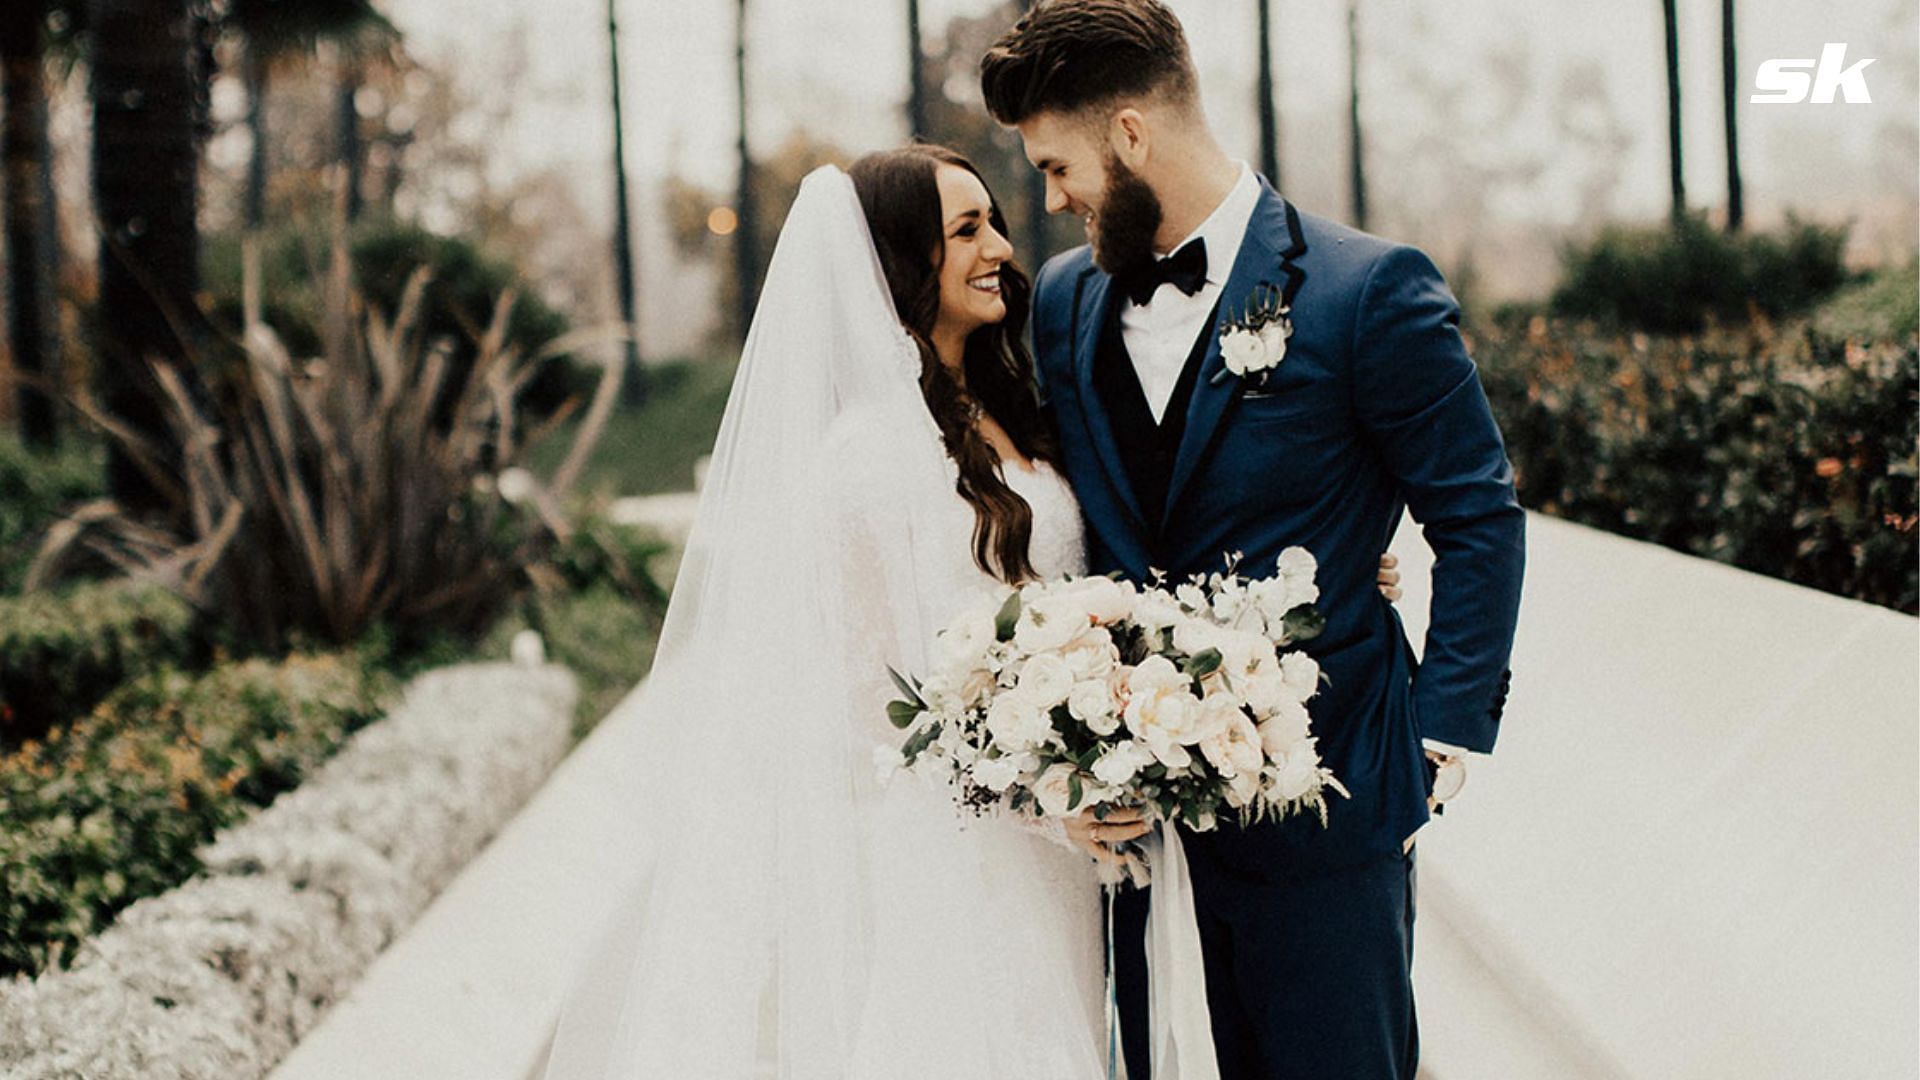 Bryce Harper with wife Kayla Harper on the wedding day in 2016.